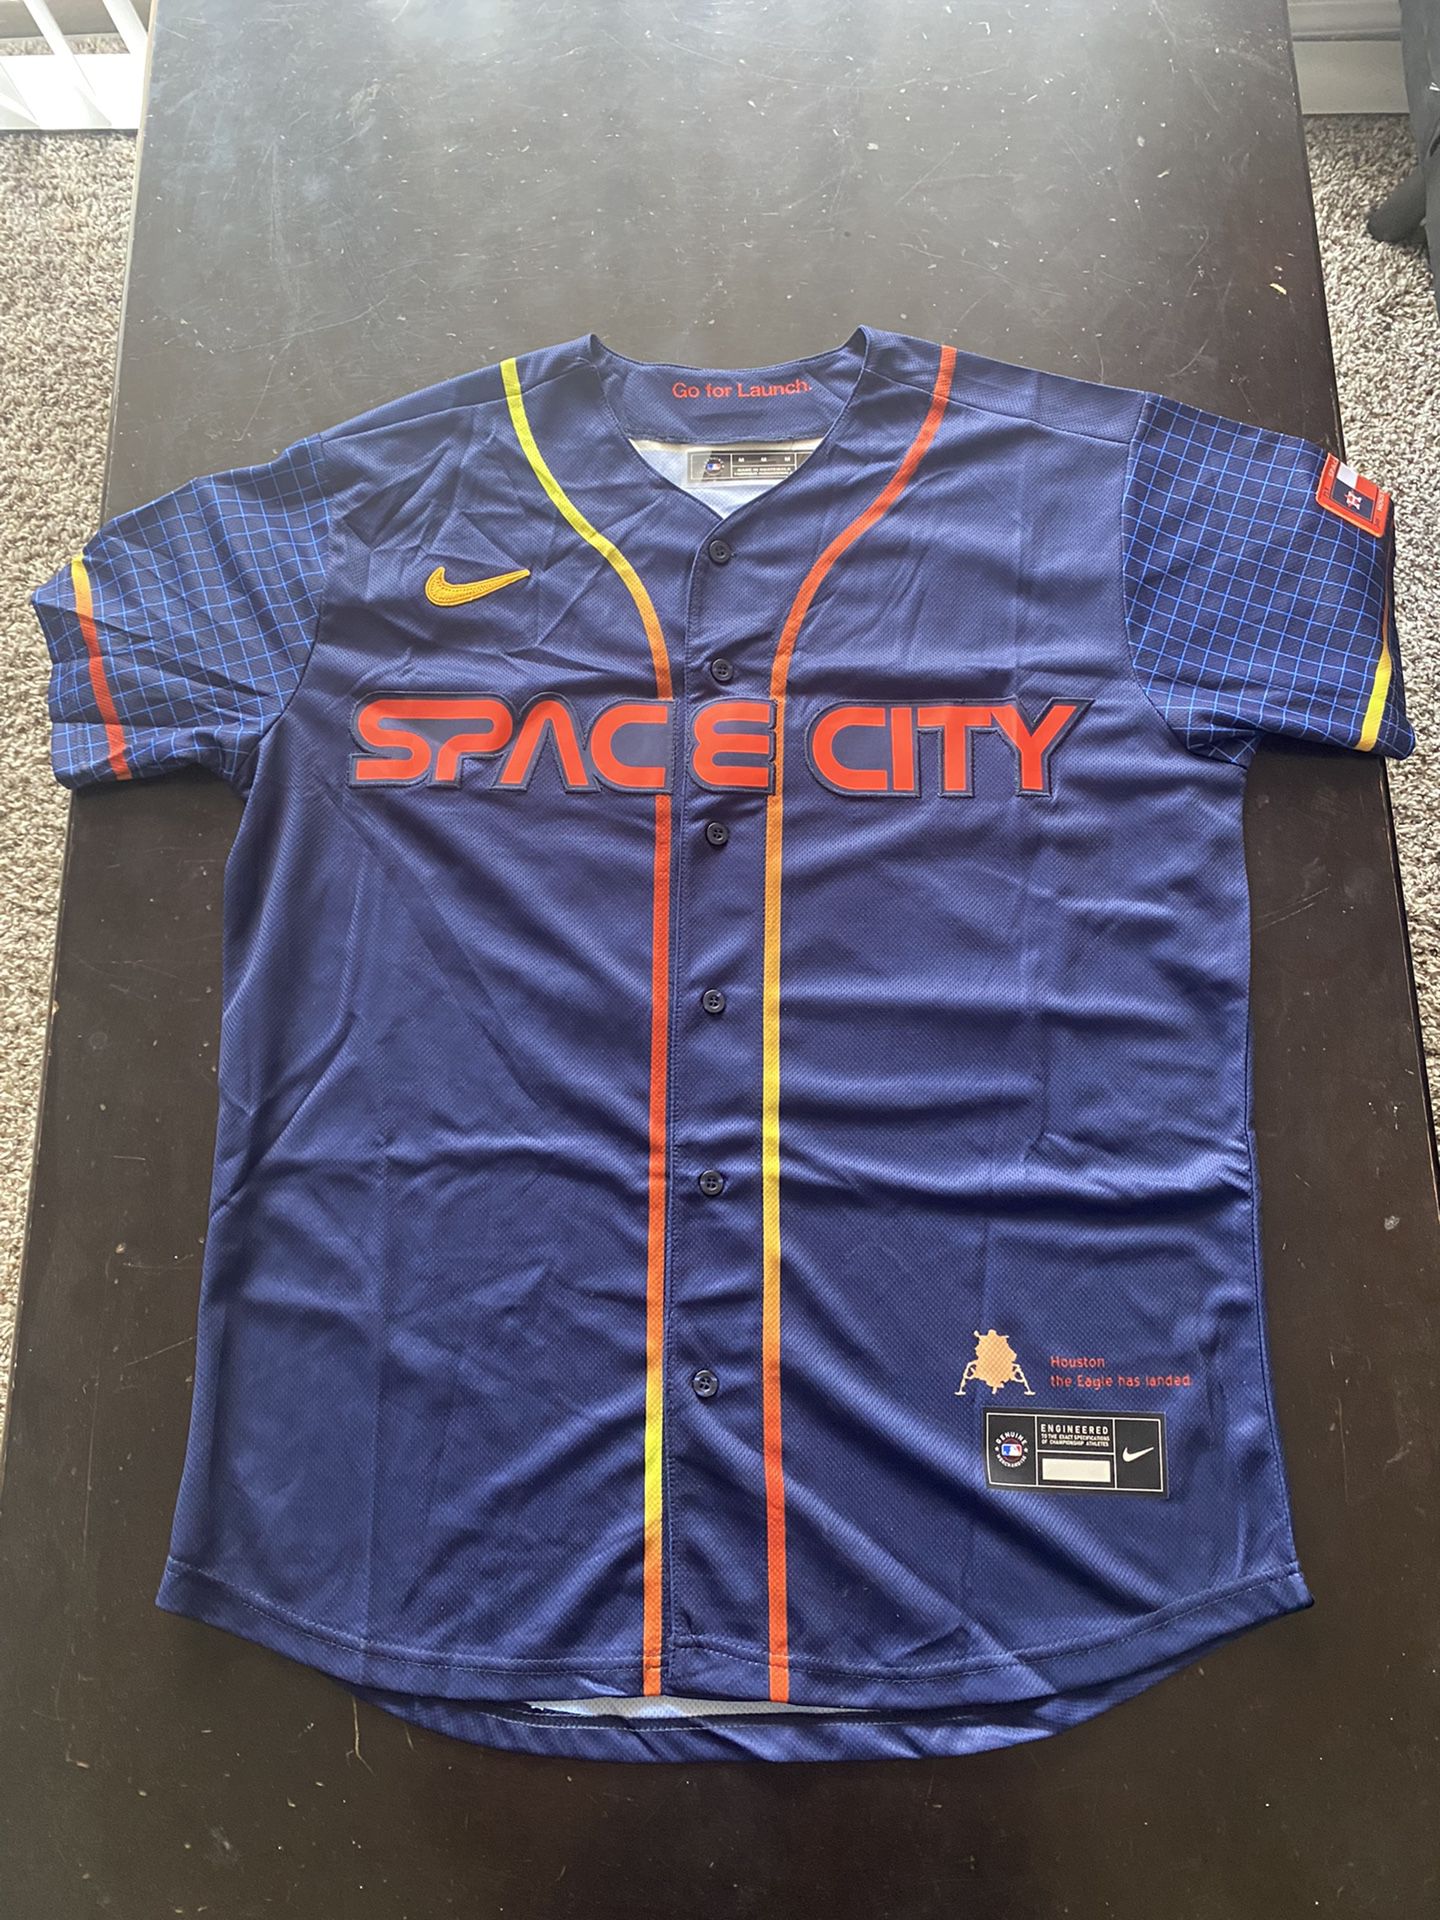 Jose Altuve #27 Space City Astros Jersey for Sale in Houston, TX - OfferUp